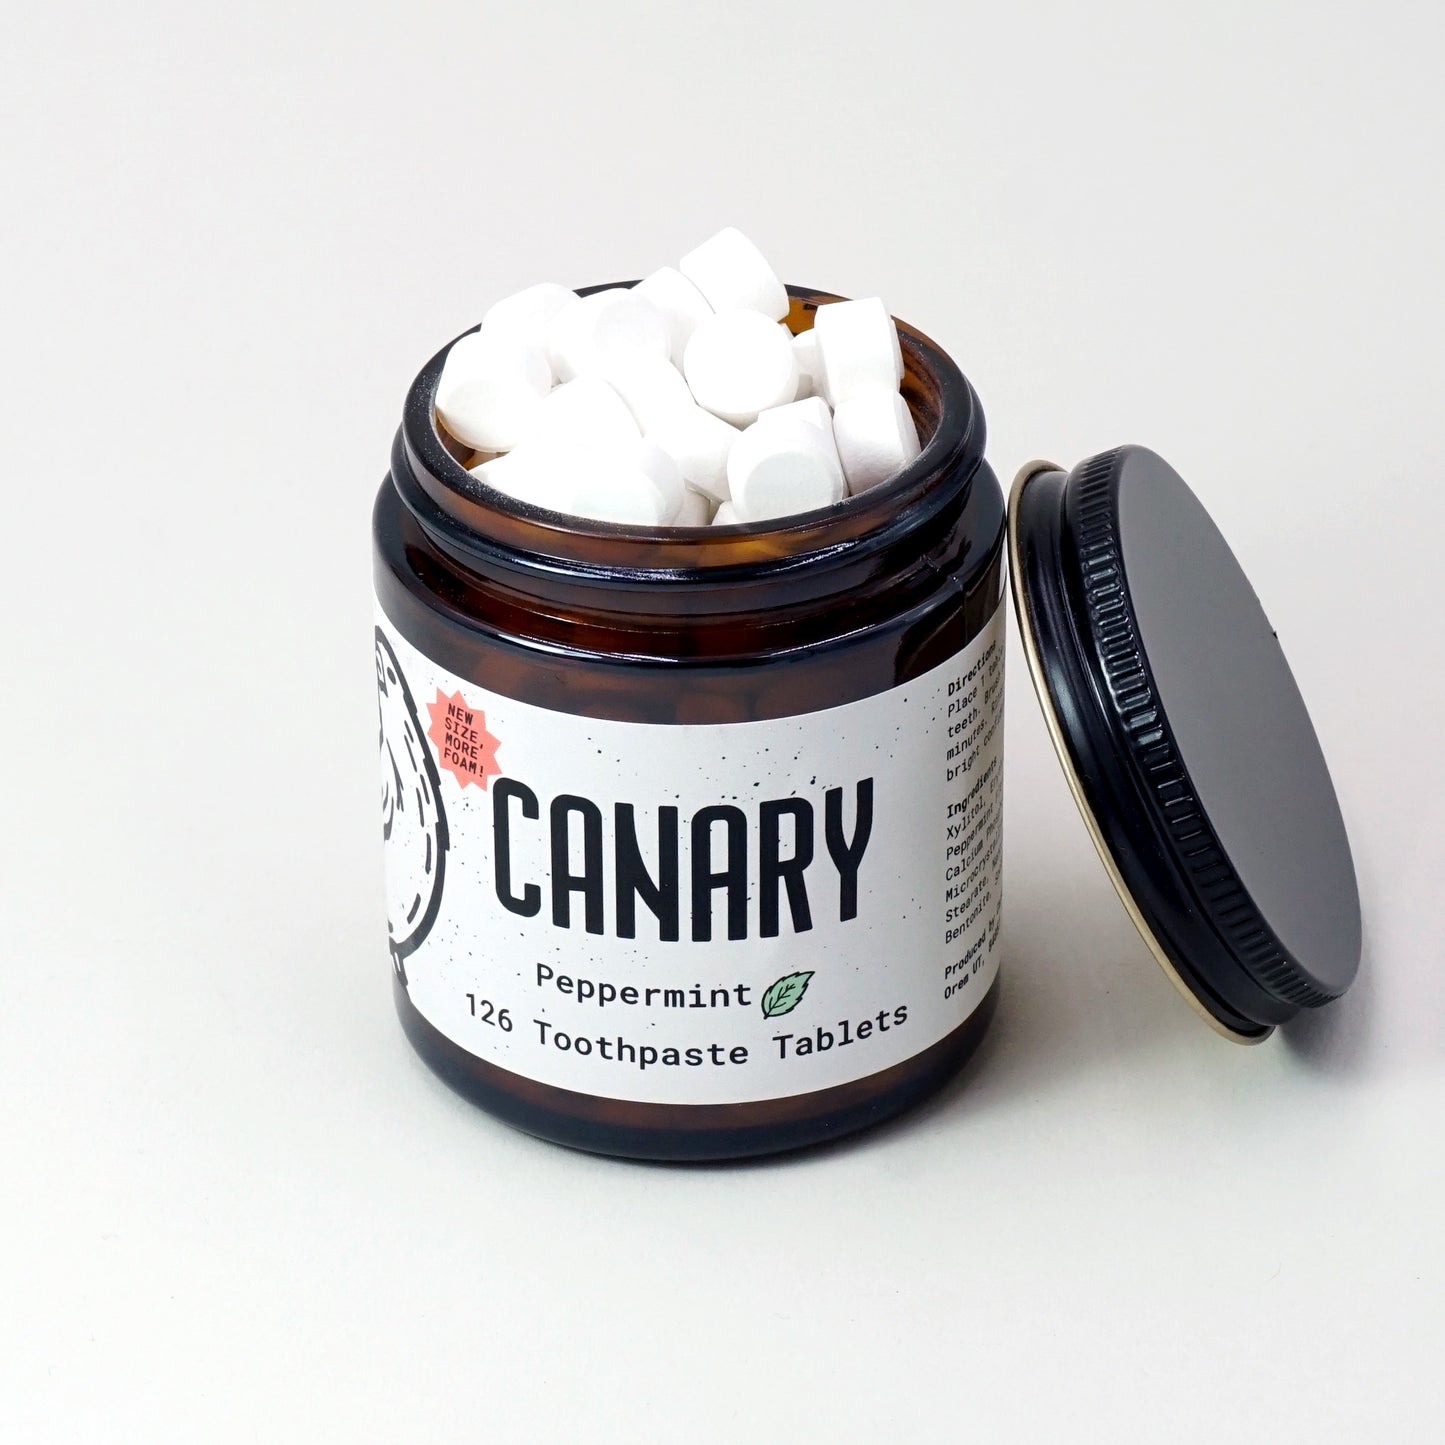 New and improved Canary Peppermint Toothpaste Tablets, 126 count jar, view from top peeking into jar at the tablets